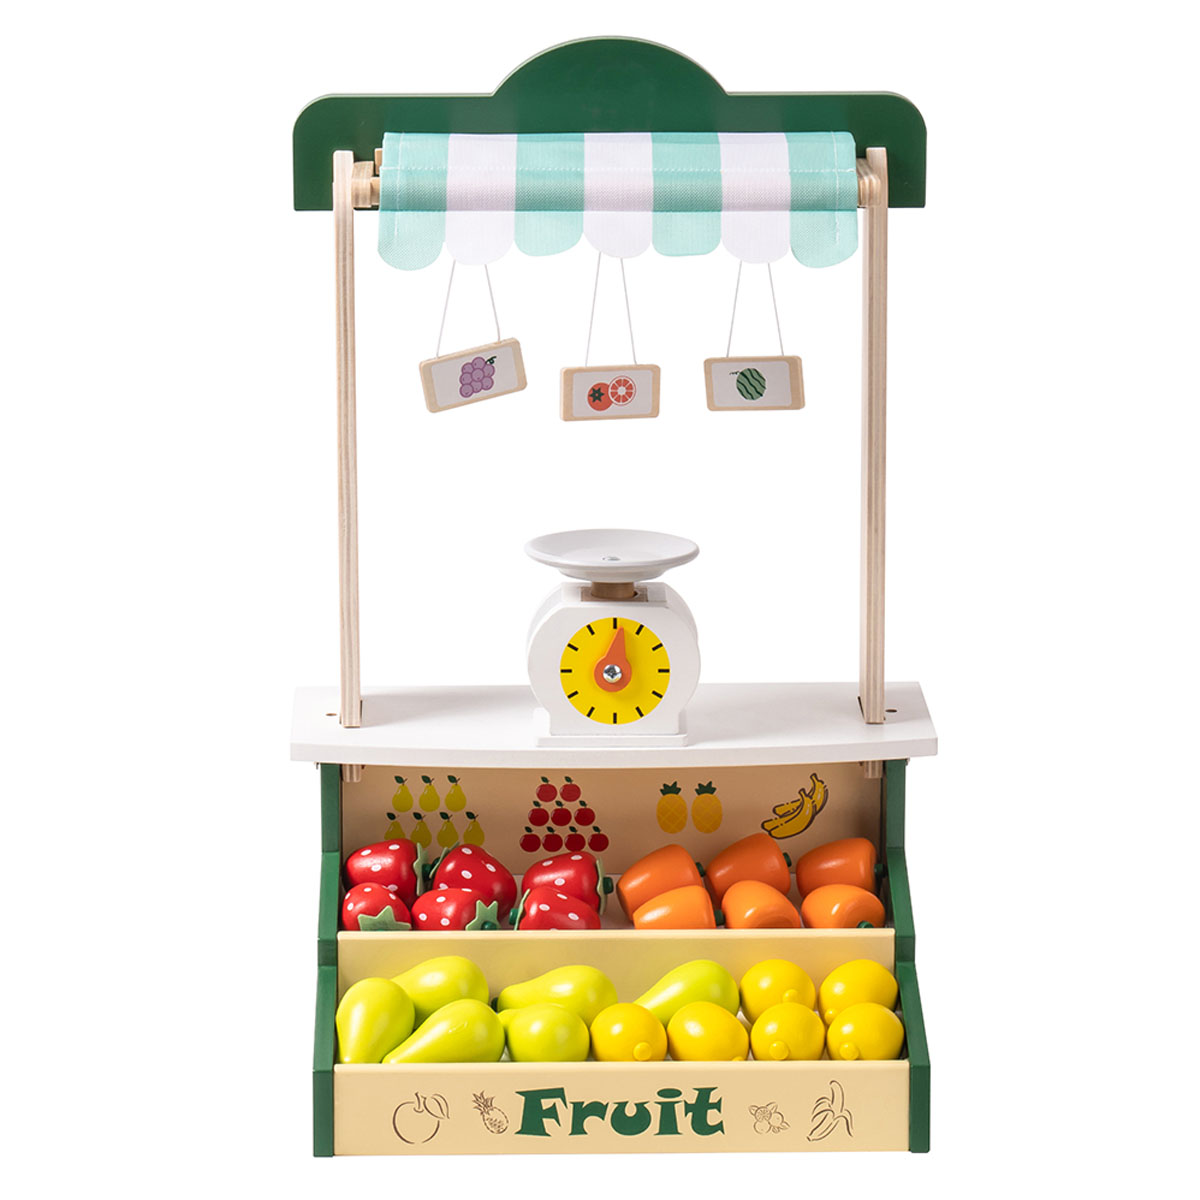 ROBUD Wooden Farmers Market Stand Fruit Stall